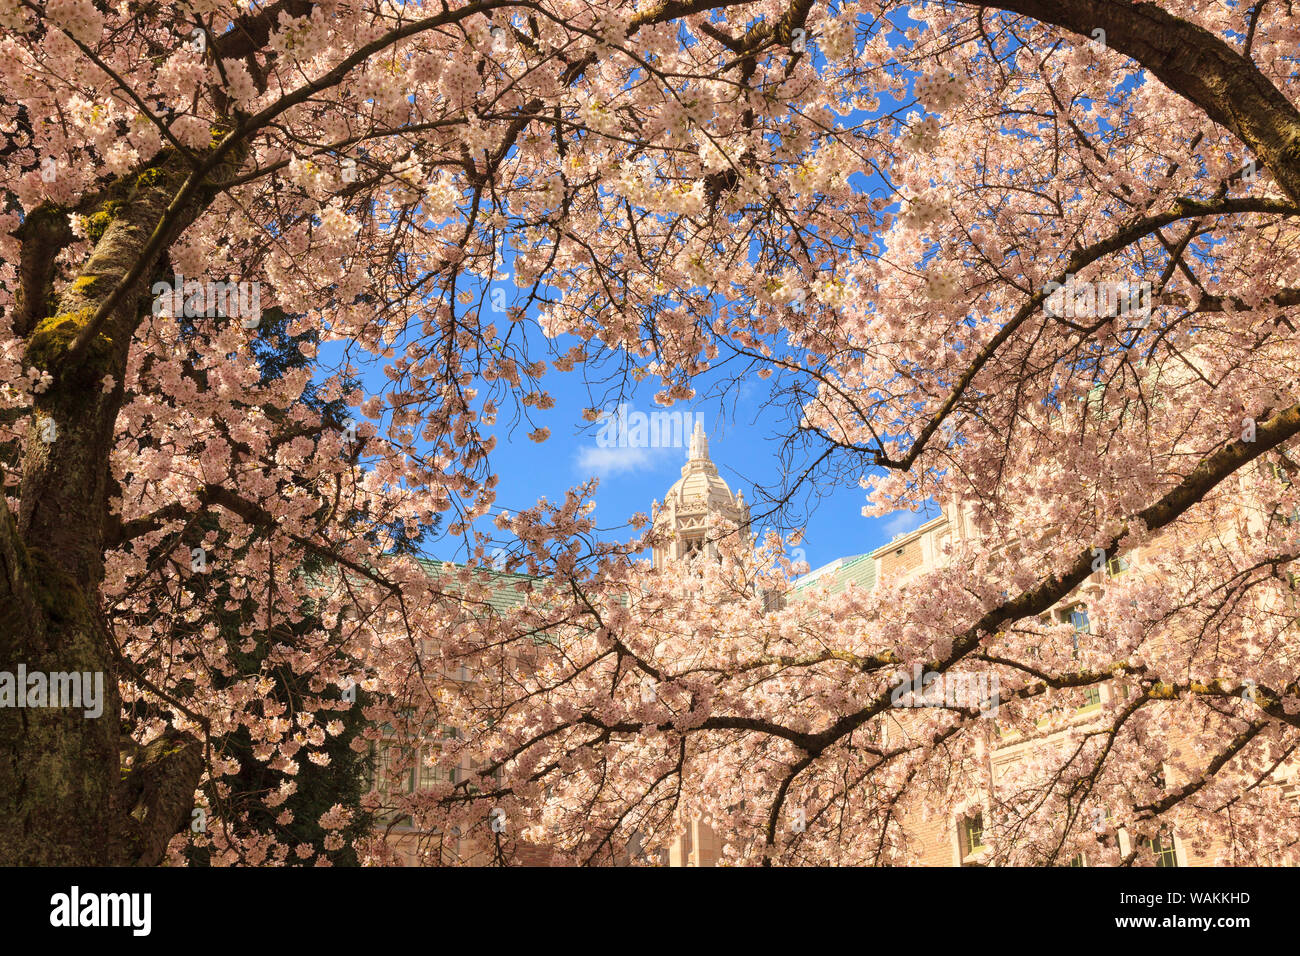 Cherry Blossoms in peak bloom, Spring, University of Washington campus, Seattle, Washington State, USA (Editorial Use Only) Stock Photo